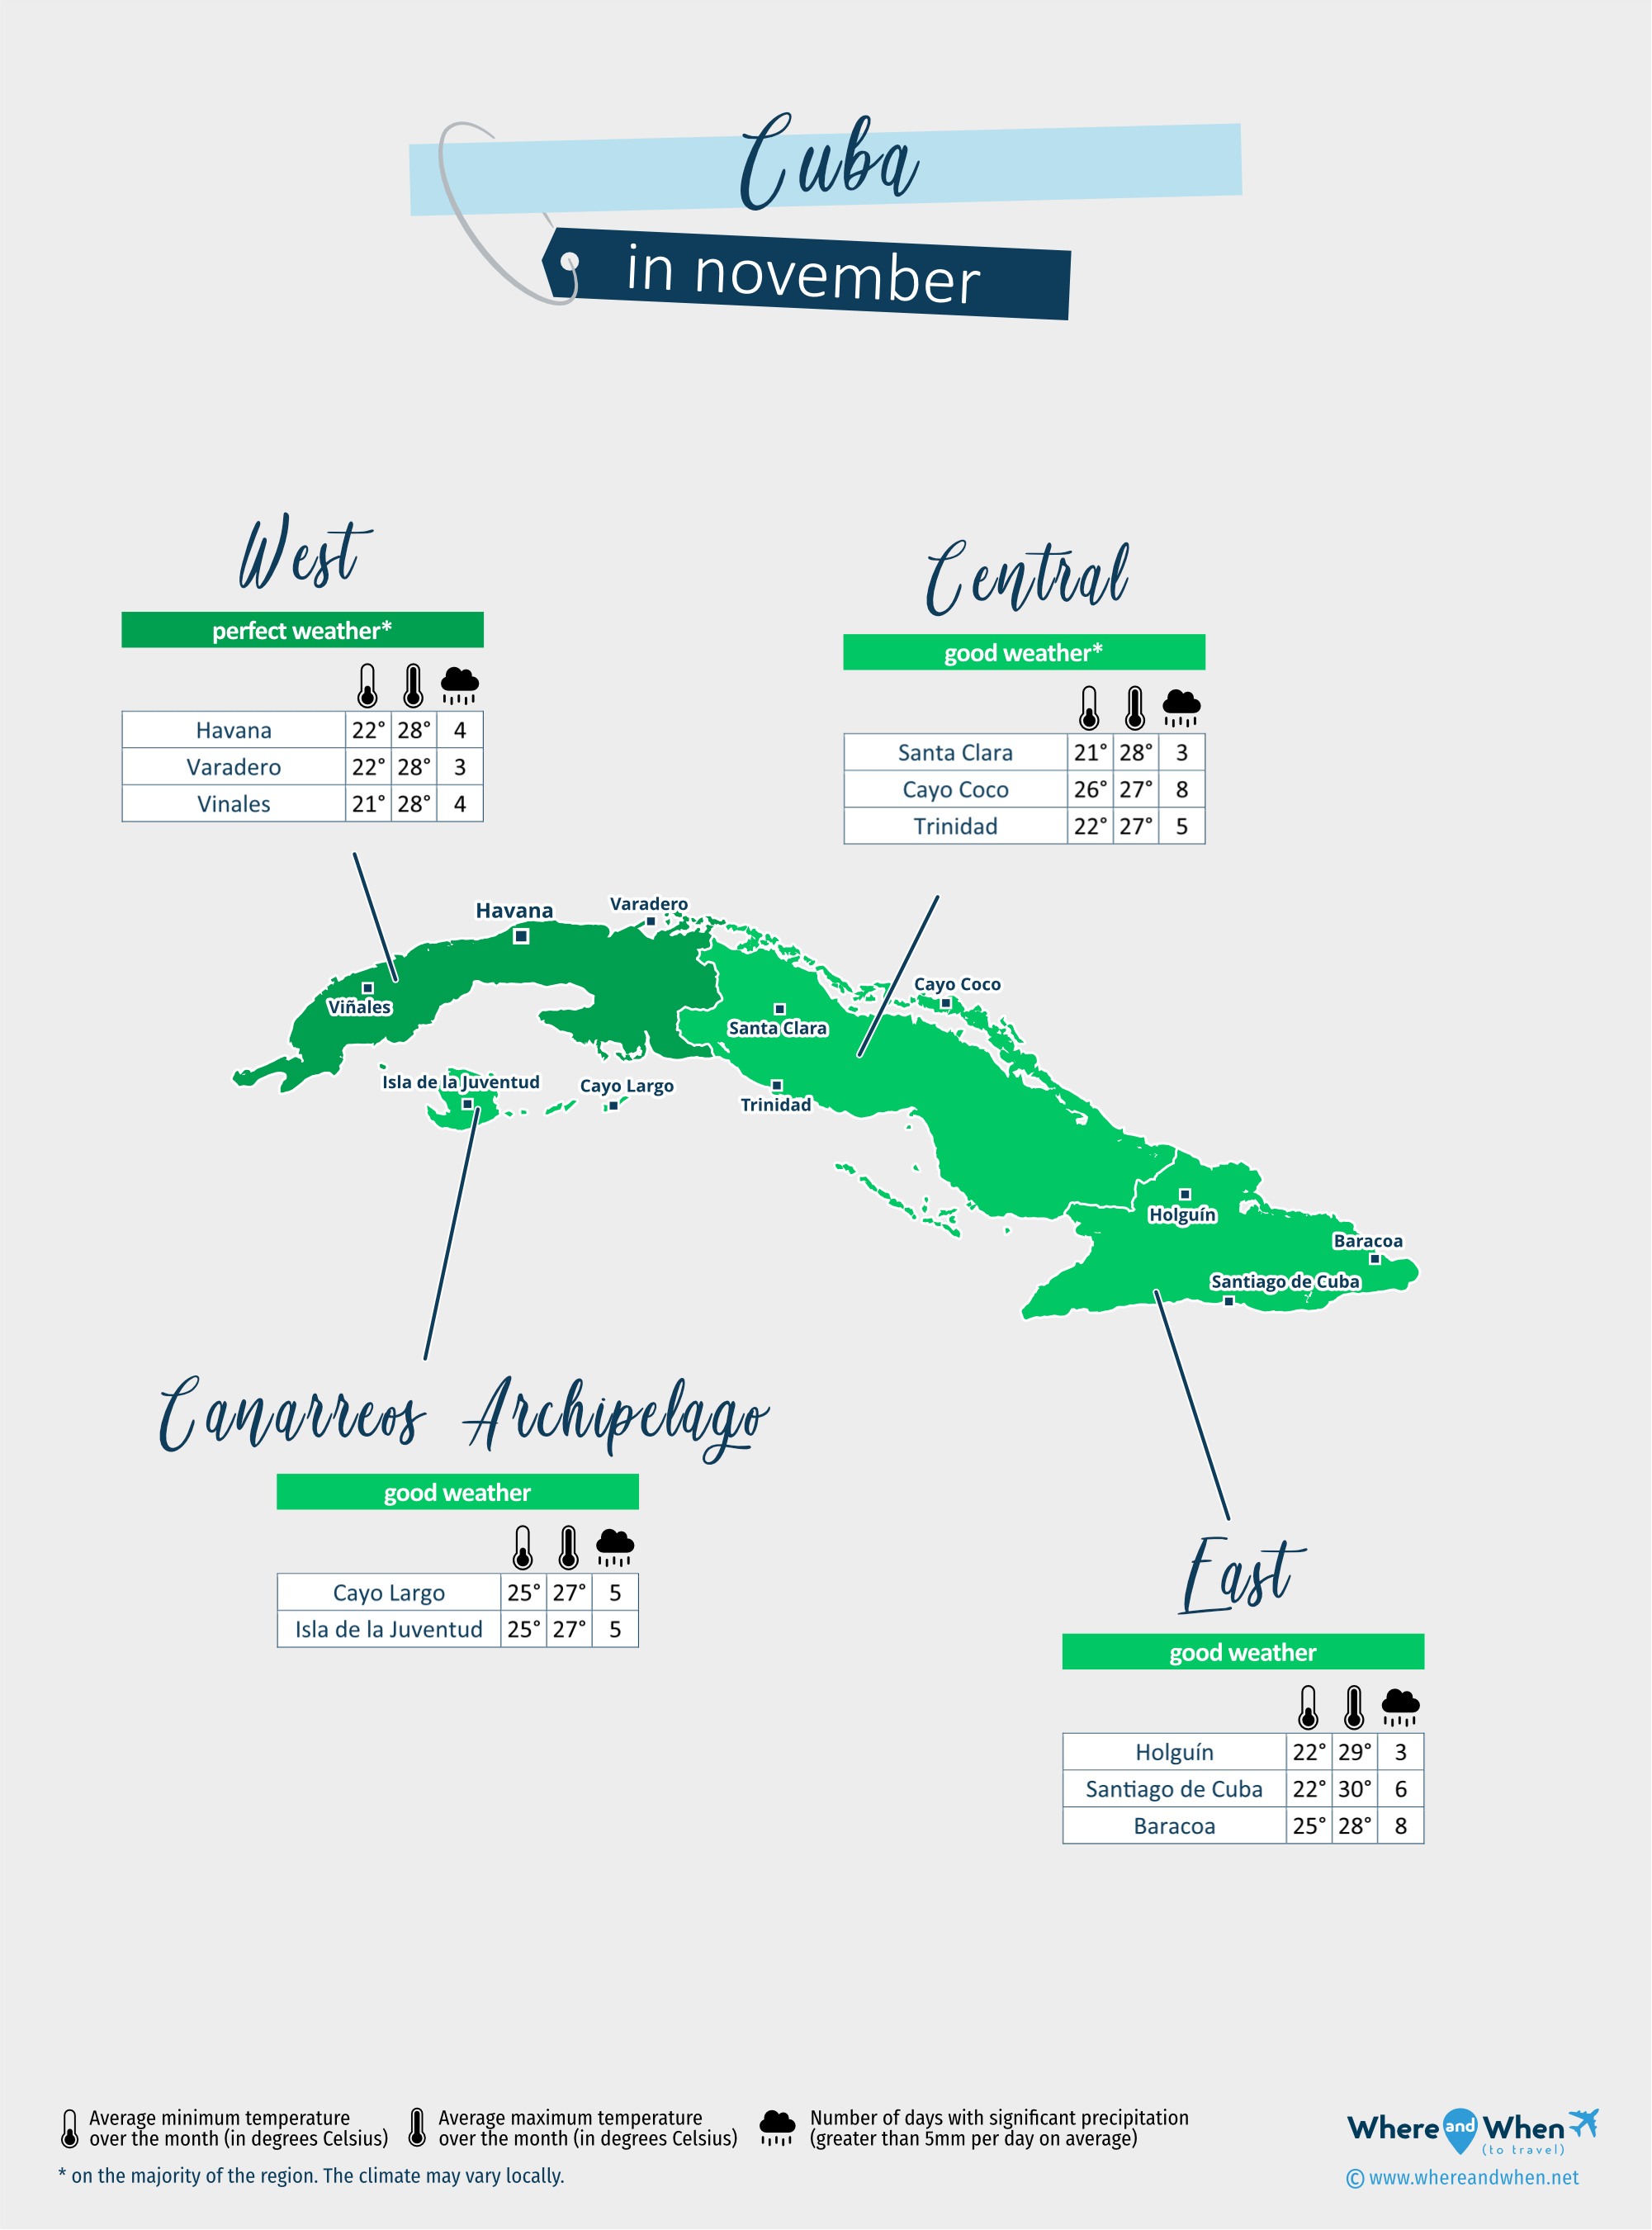 Cuba: weather map in november in different regions